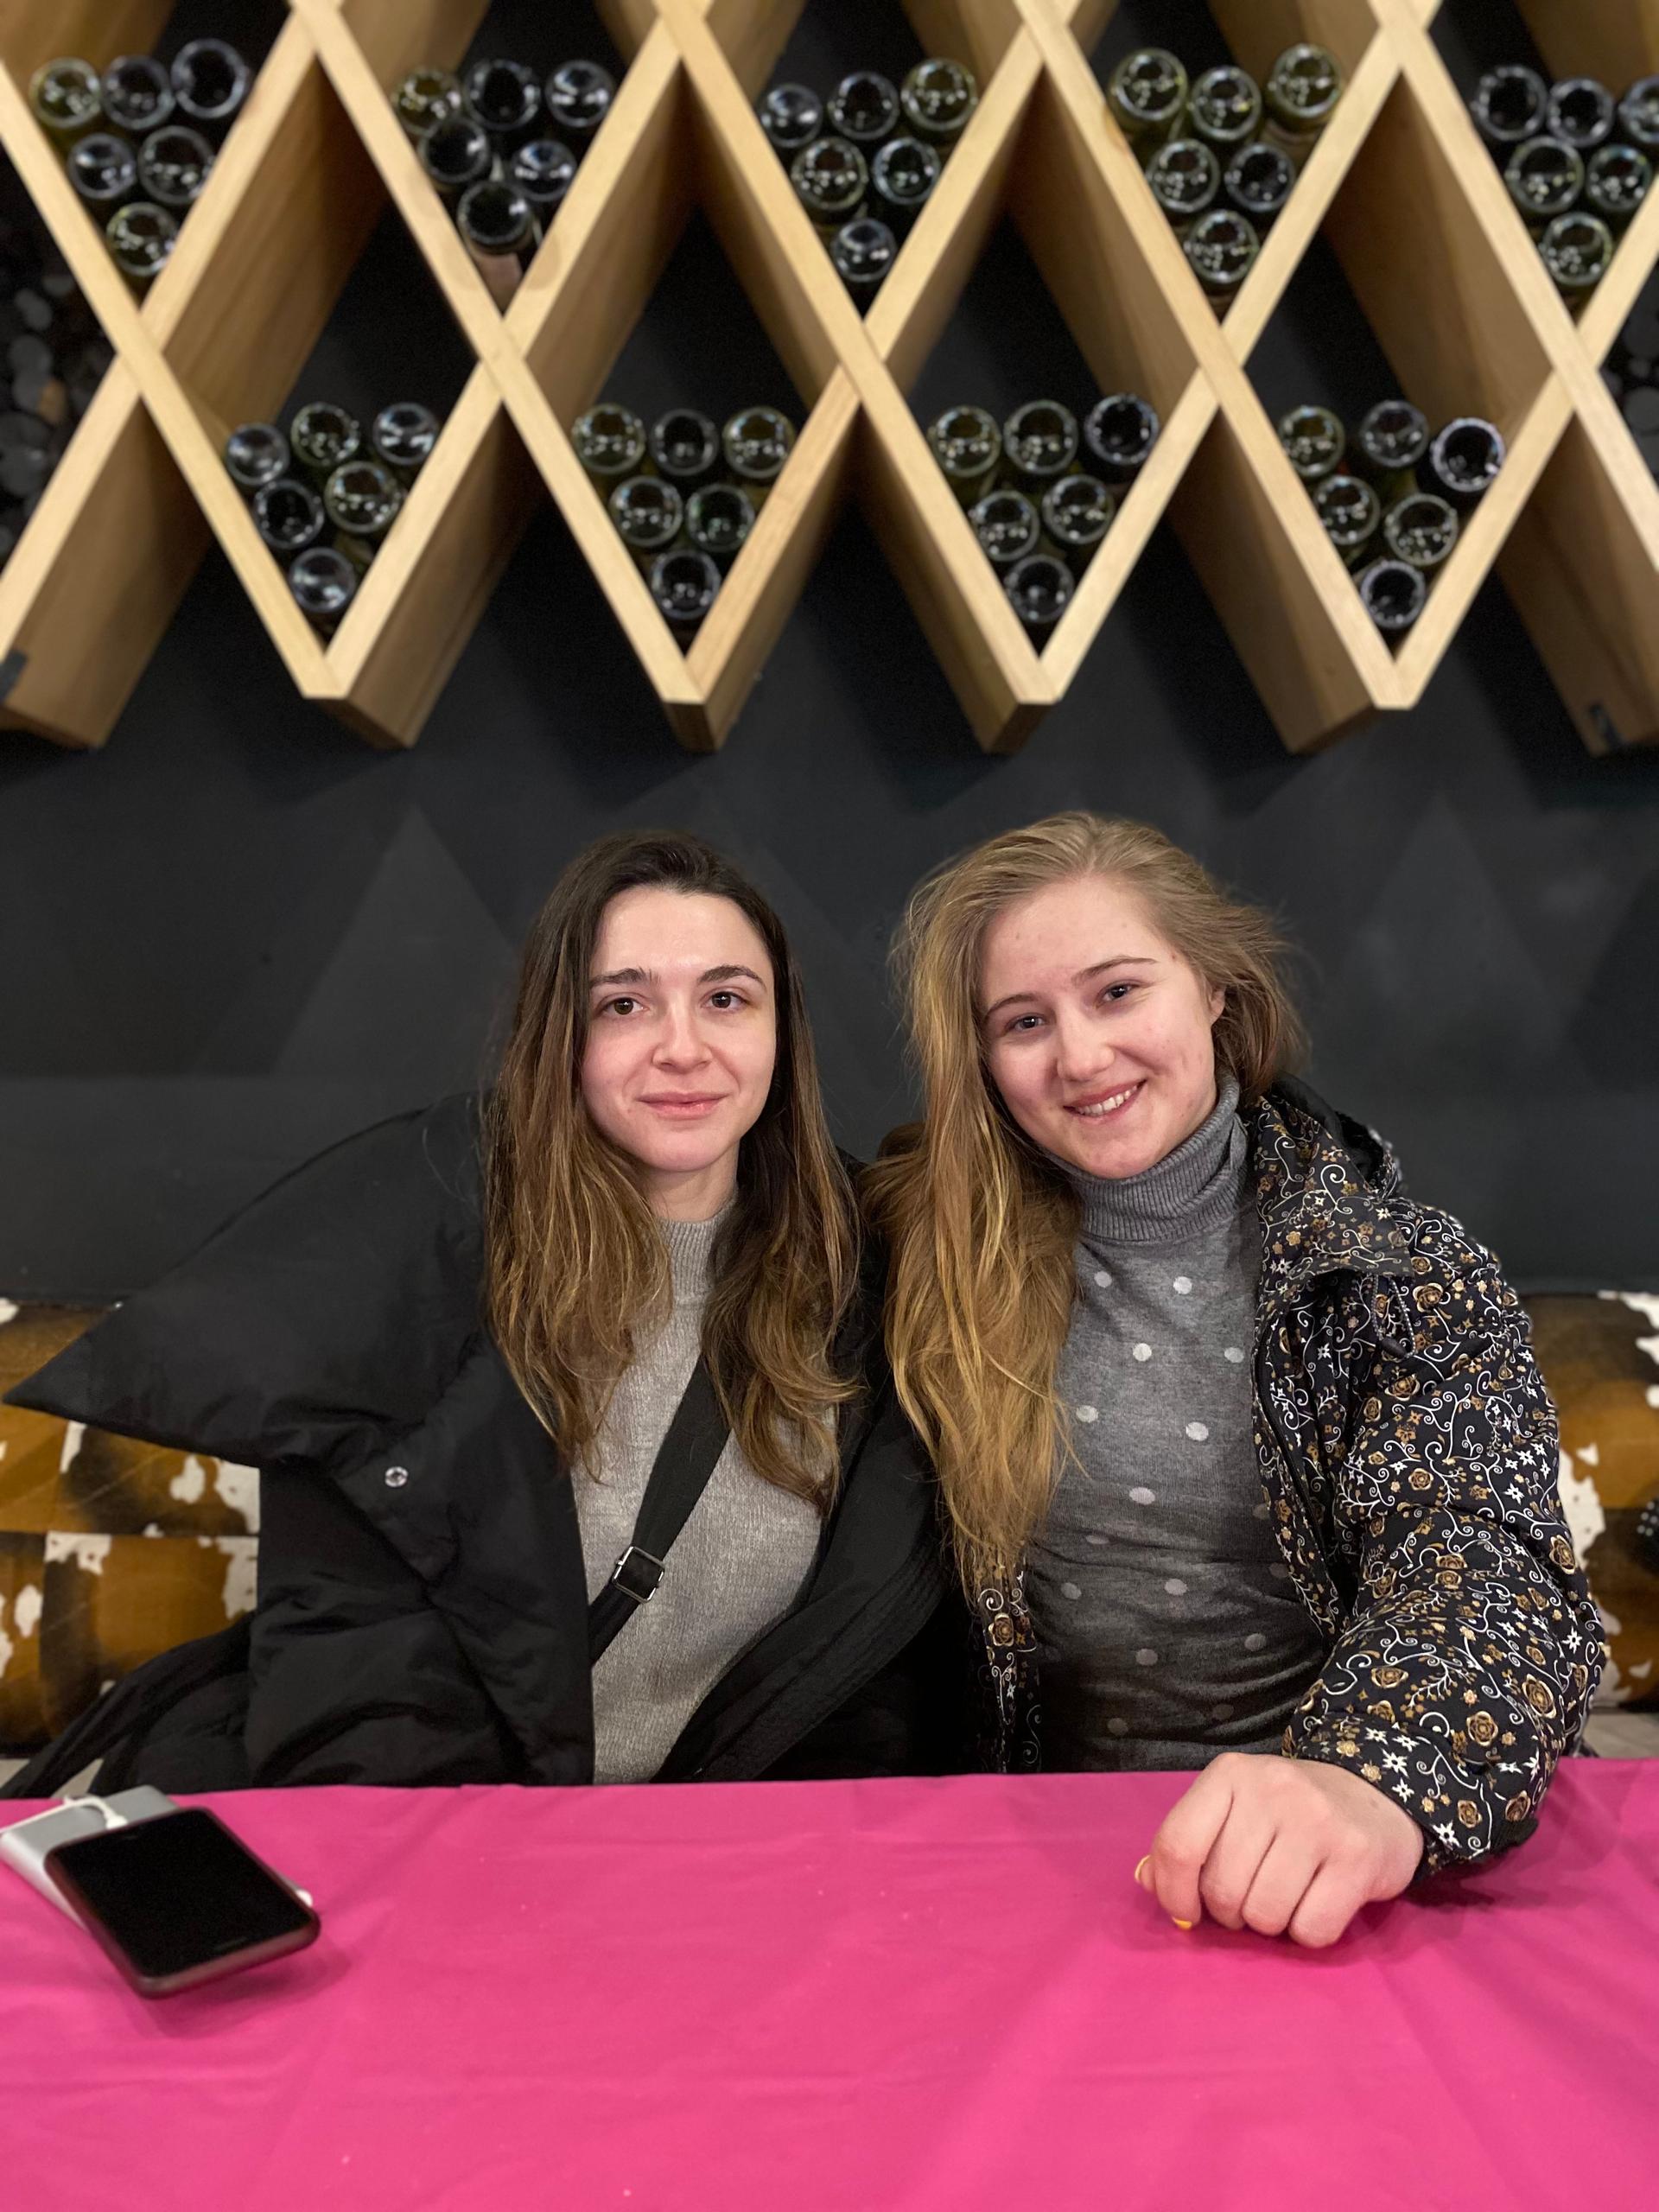 Karyina Omelchuk and Polina Volodina both escaped the war ravaged cities of Donetsk and Melitopol and are now living at a temporary shelter in Lviv, Ukraine.